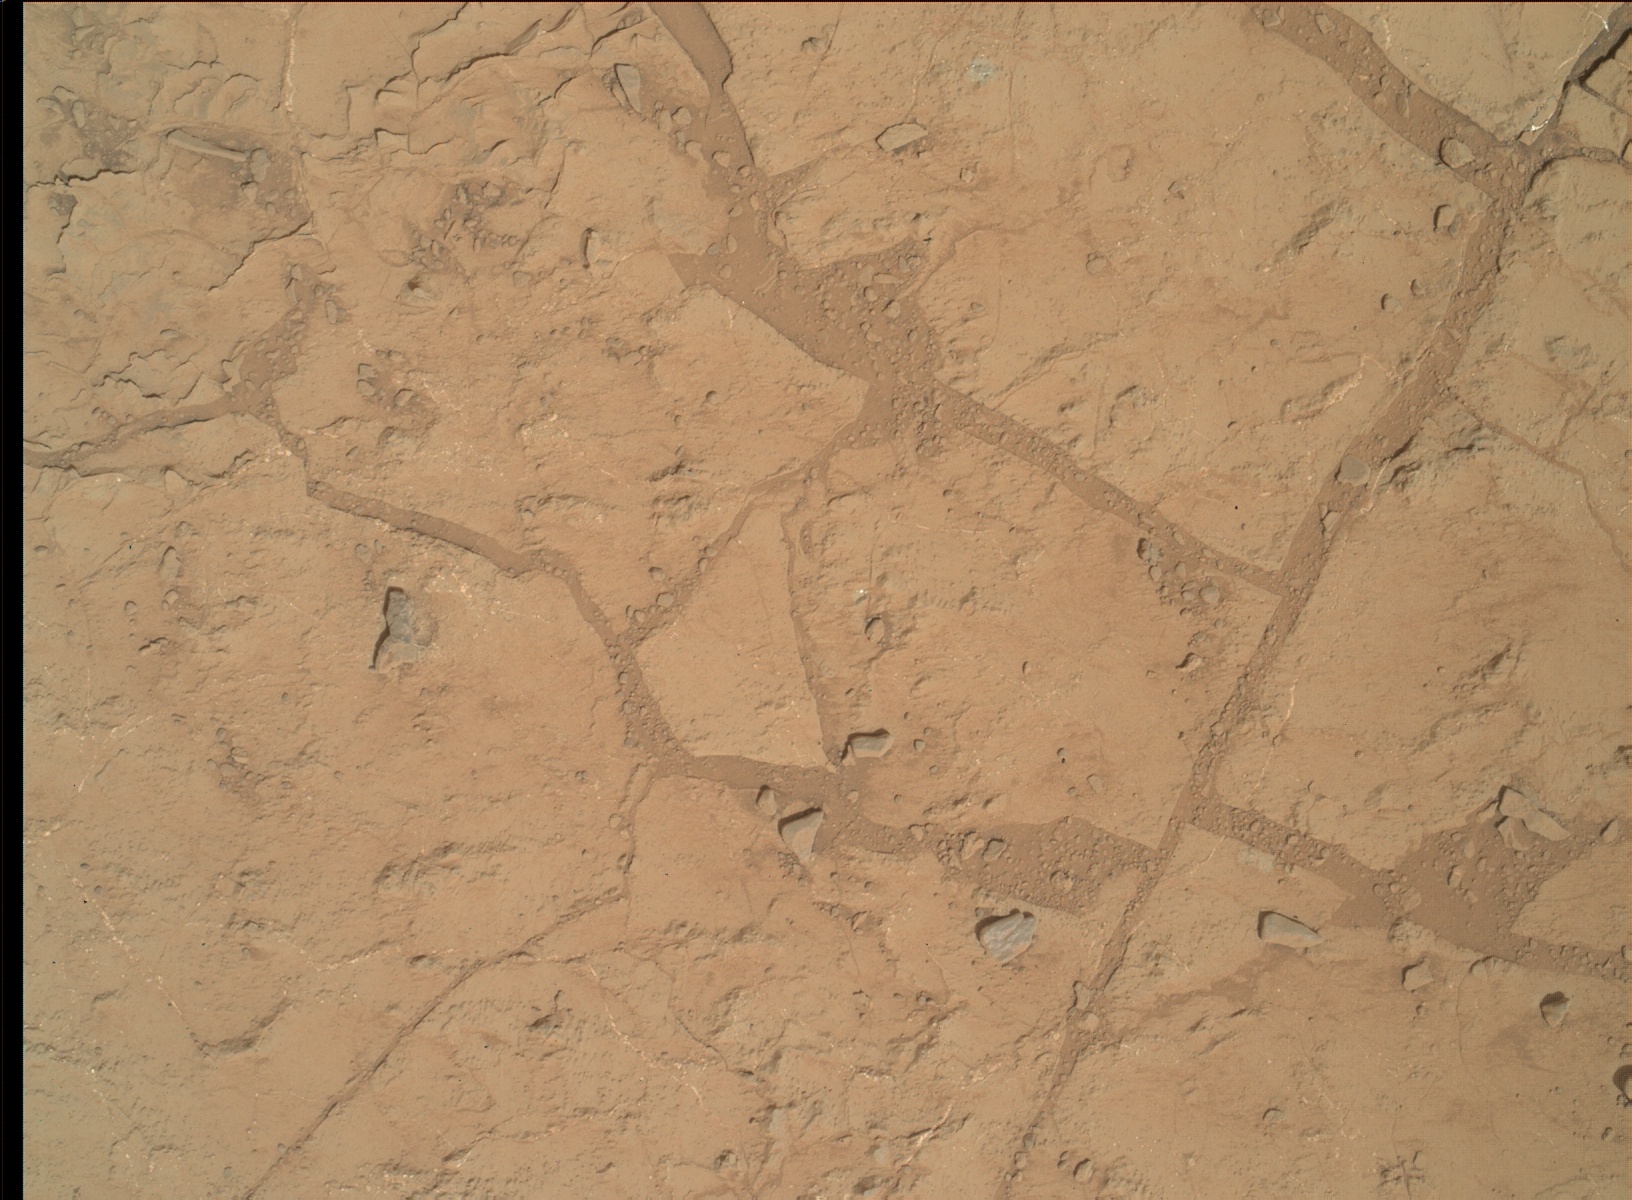 Nasa's Mars rover Curiosity acquired this image using its Mars Hand Lens Imager (MAHLI) on Sol 179